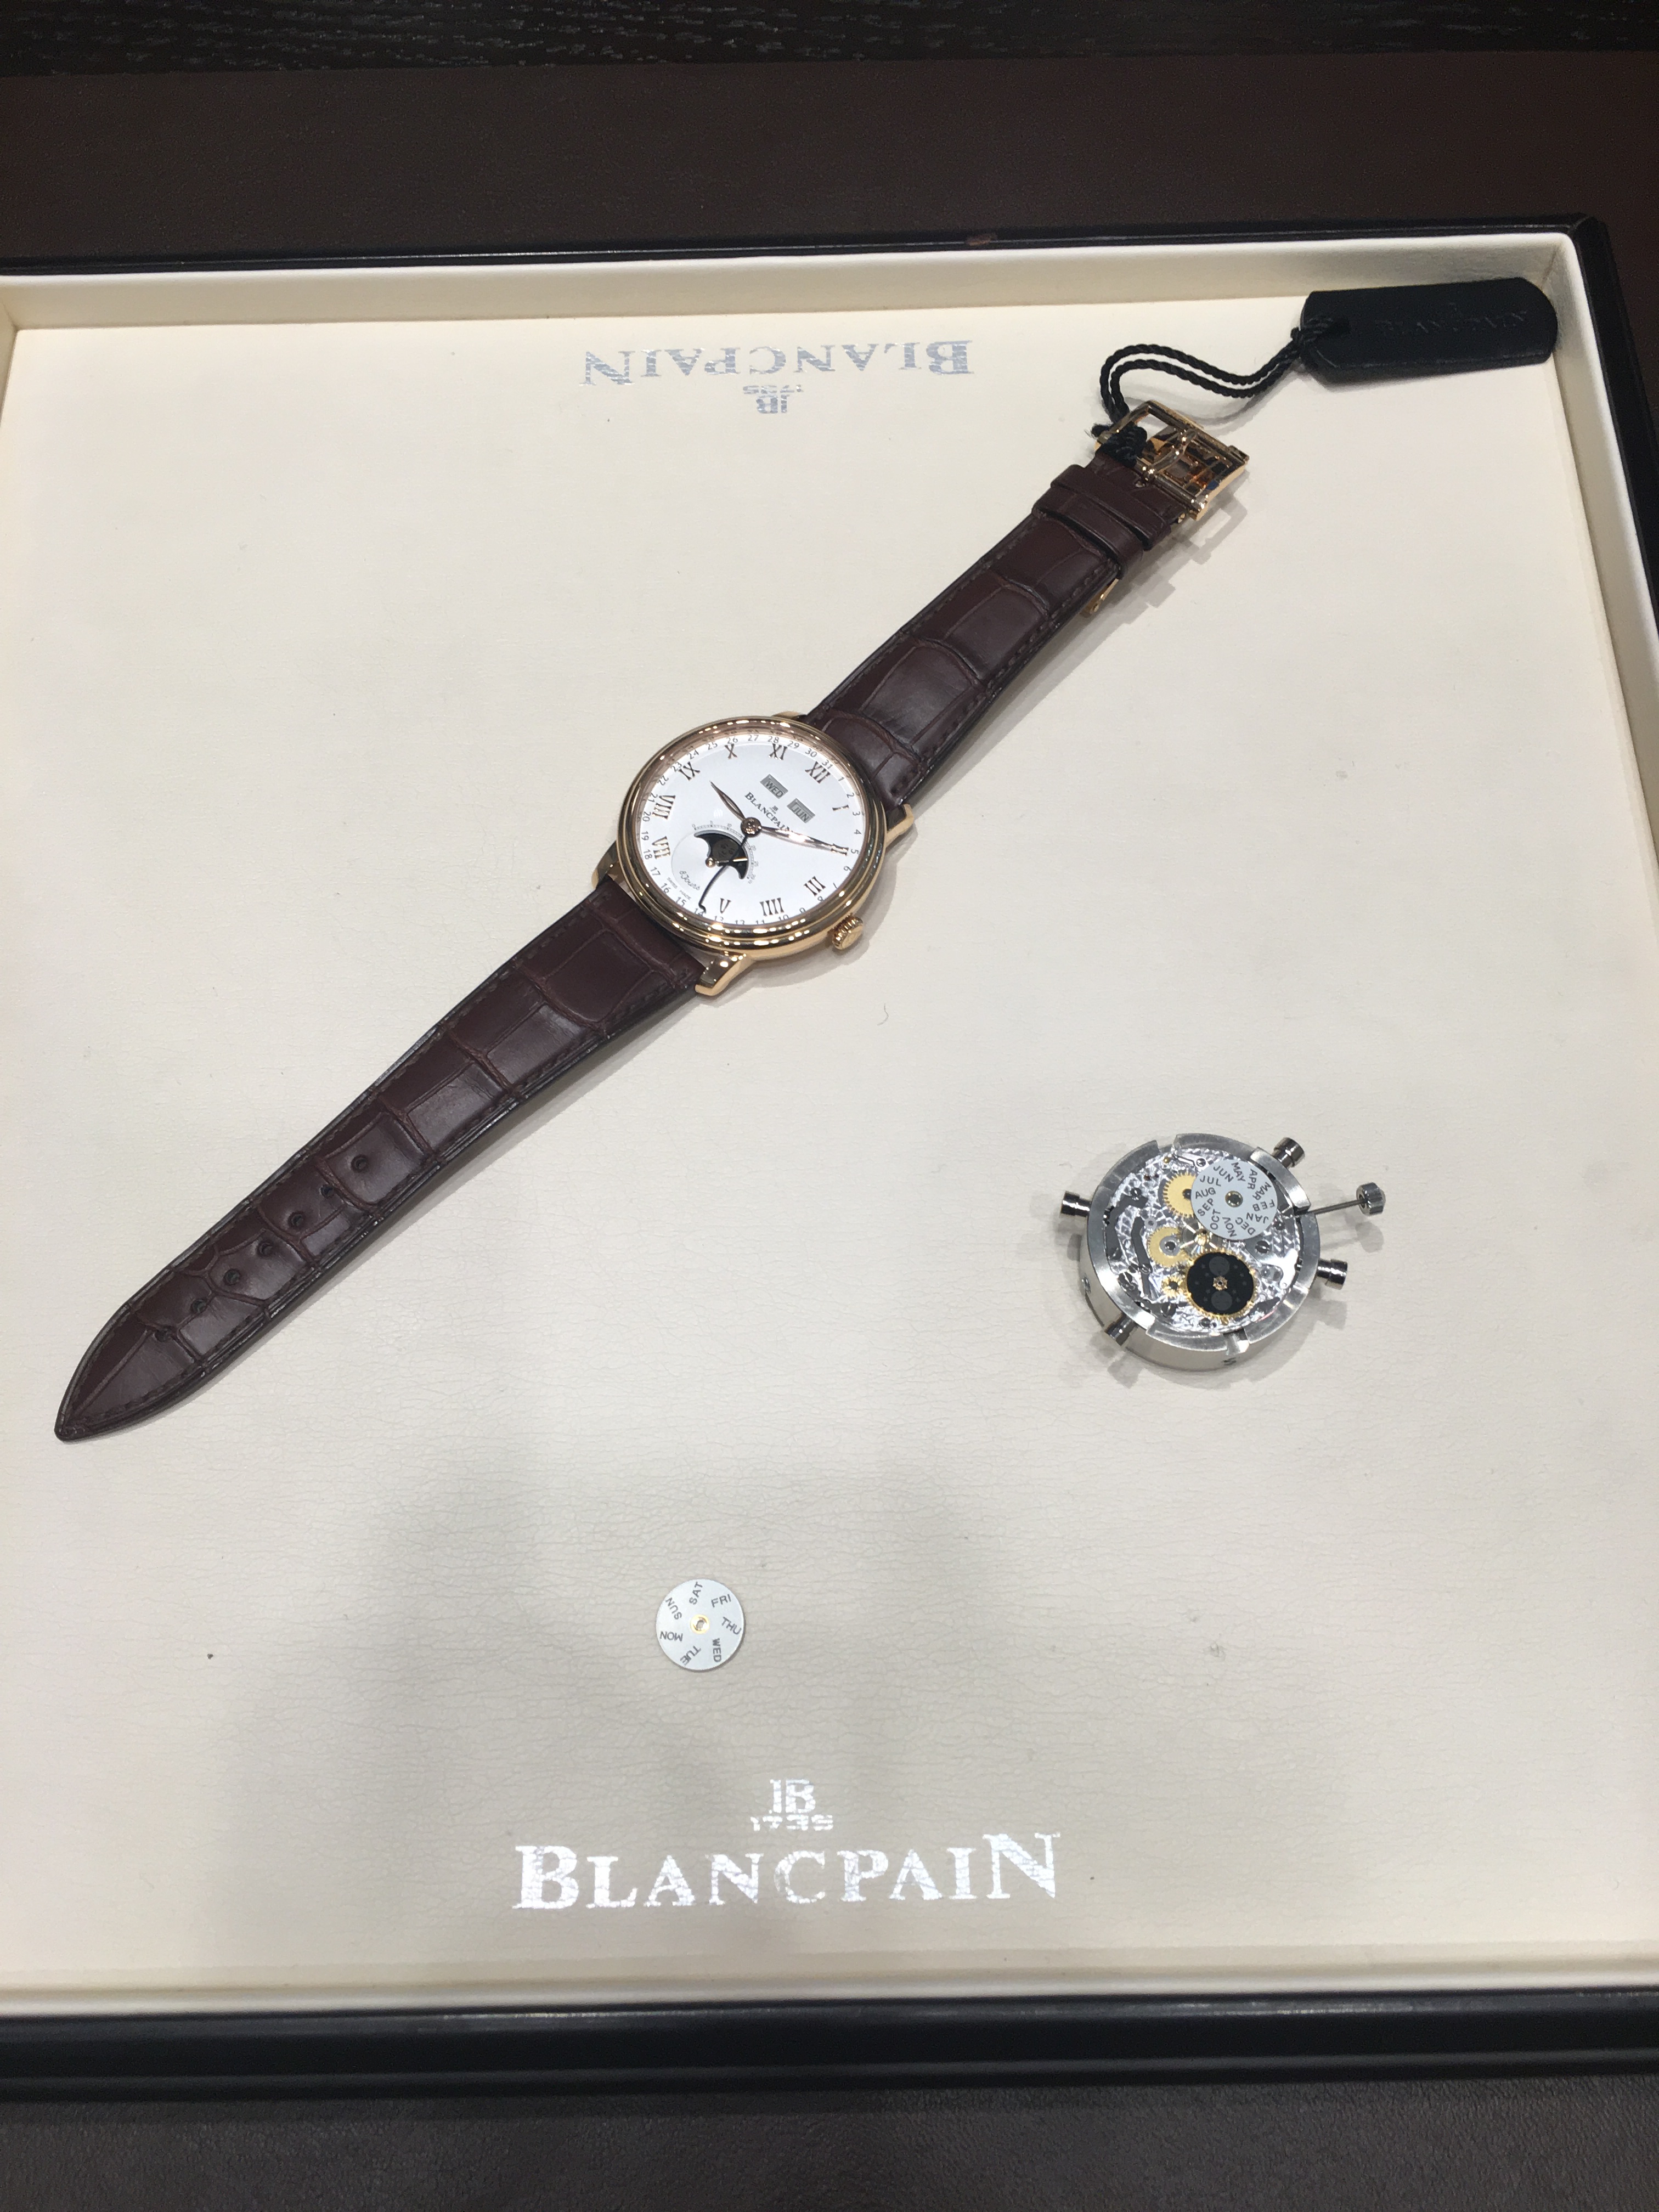 An Evening with Blancpain Watches